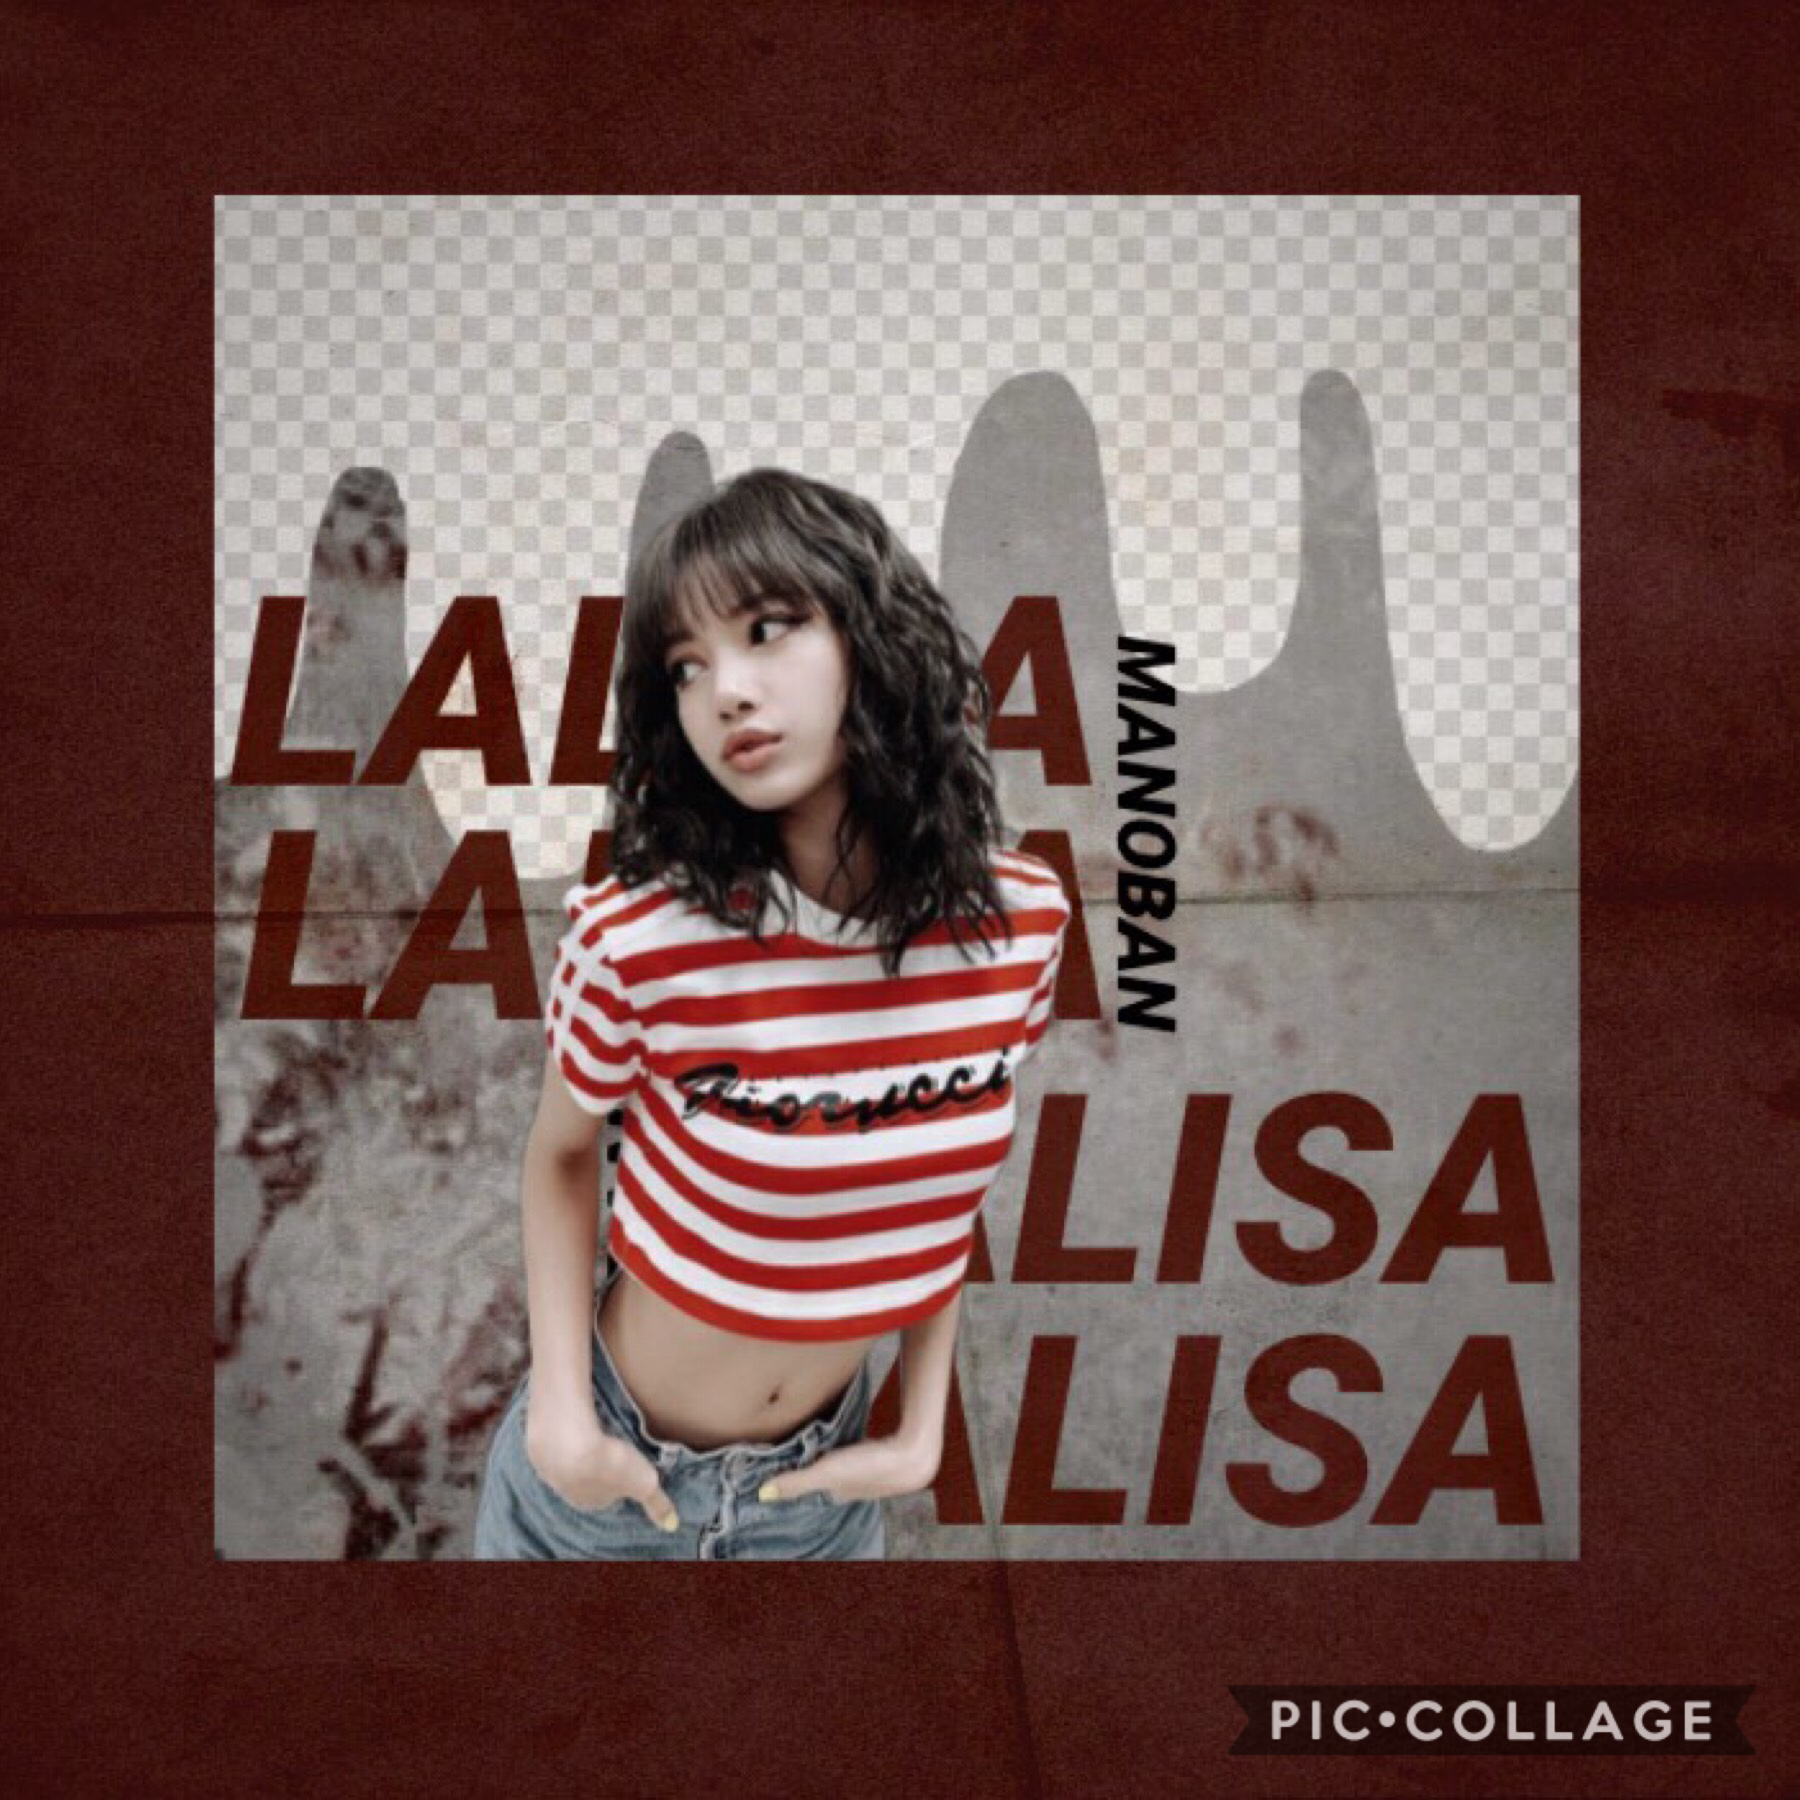 ~🍒~
Lisa, BLACKPINK
Yeah, this is so far one of the best edits i’ve made. I hoe you all like it!
🆈🅾🆄 🅽🅸🅲🅴 🅺🅴🅴🅿 🅶🅾🅸🅽🅶❤️❤️❤️